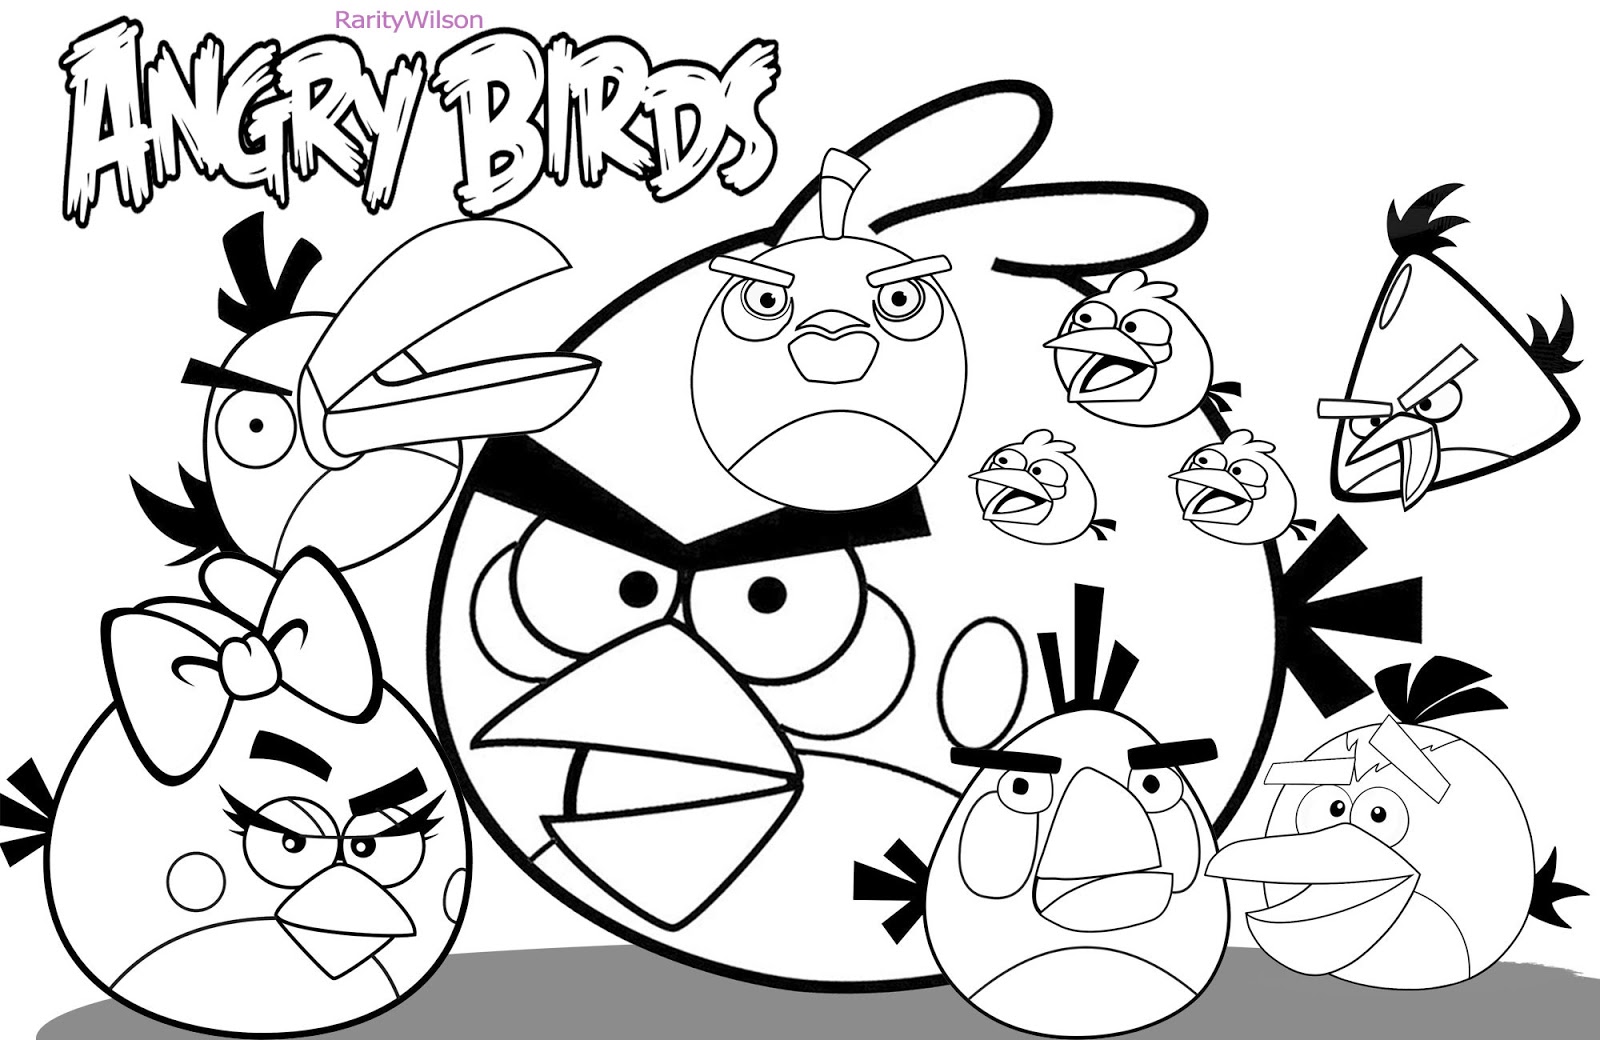 Personalized Party Invites News - Angry Birds Free Printable ...